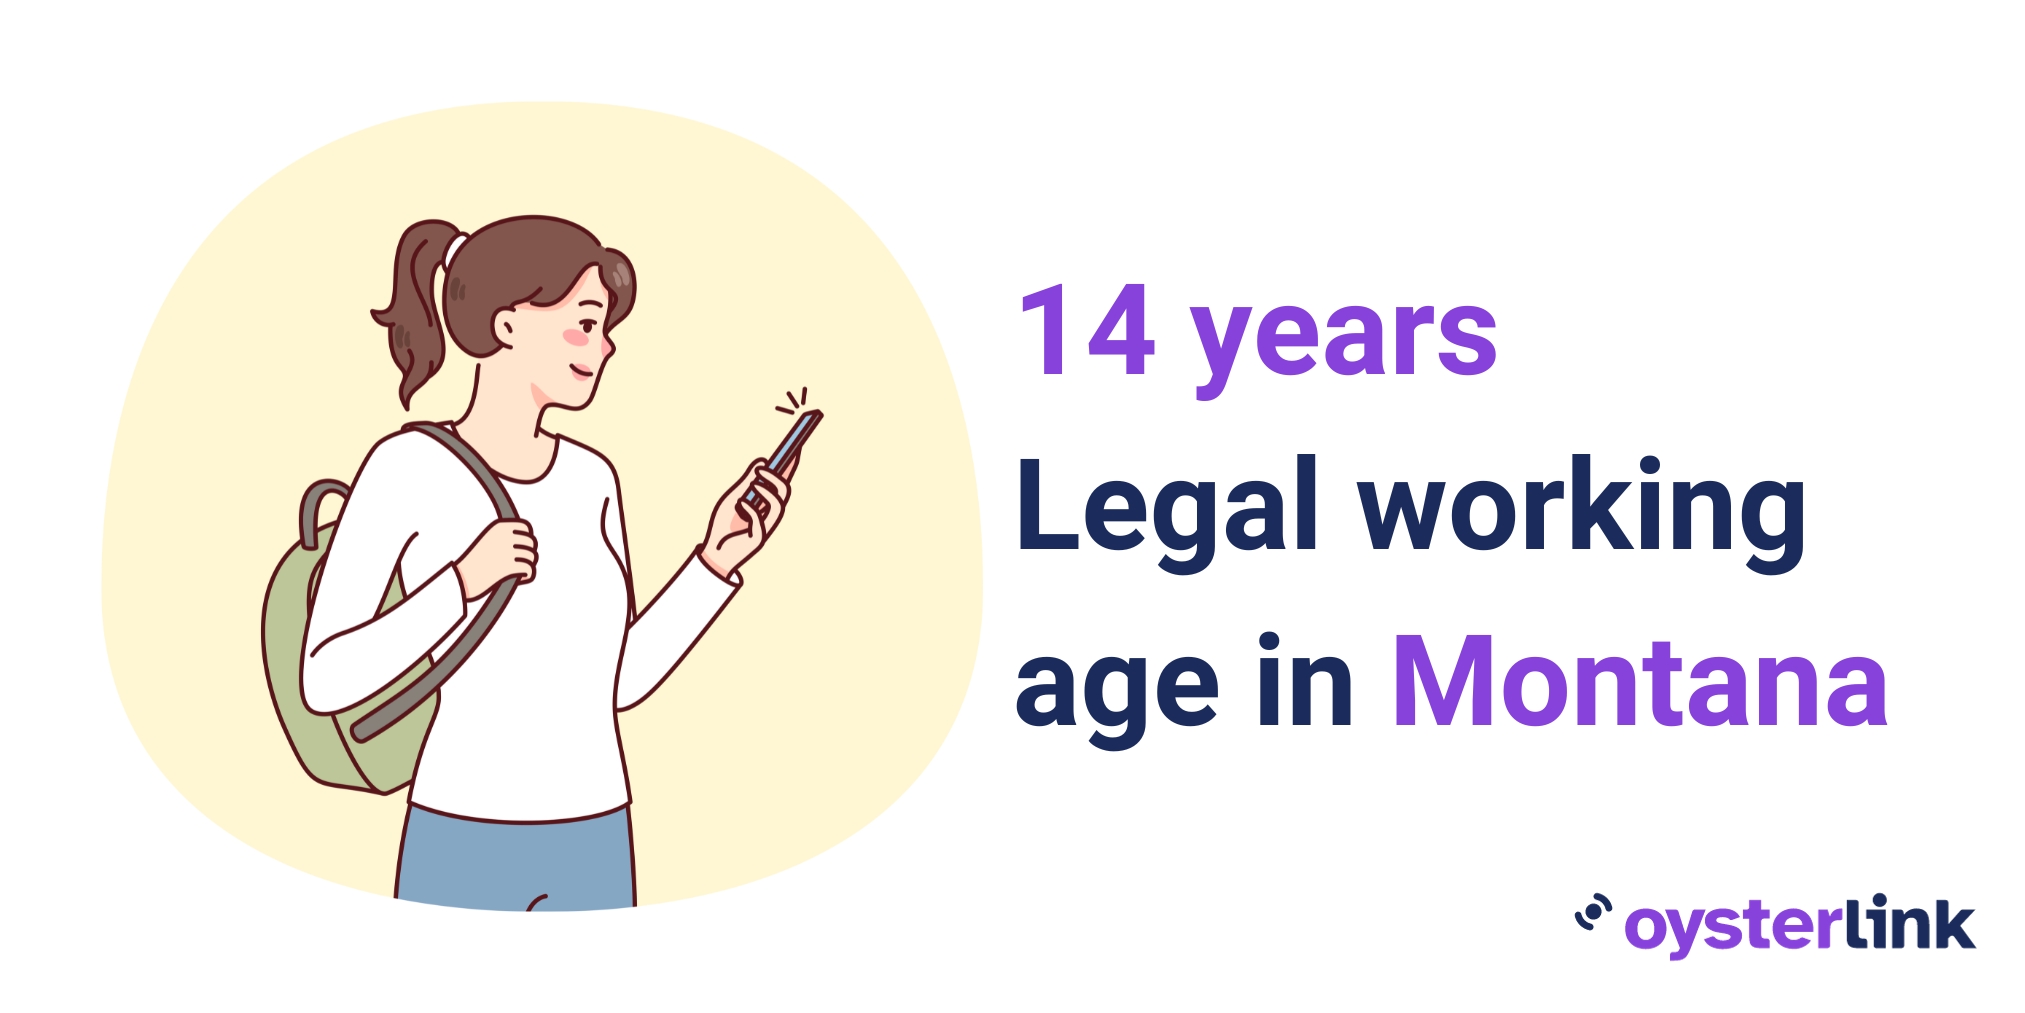 Legal working age in Montana